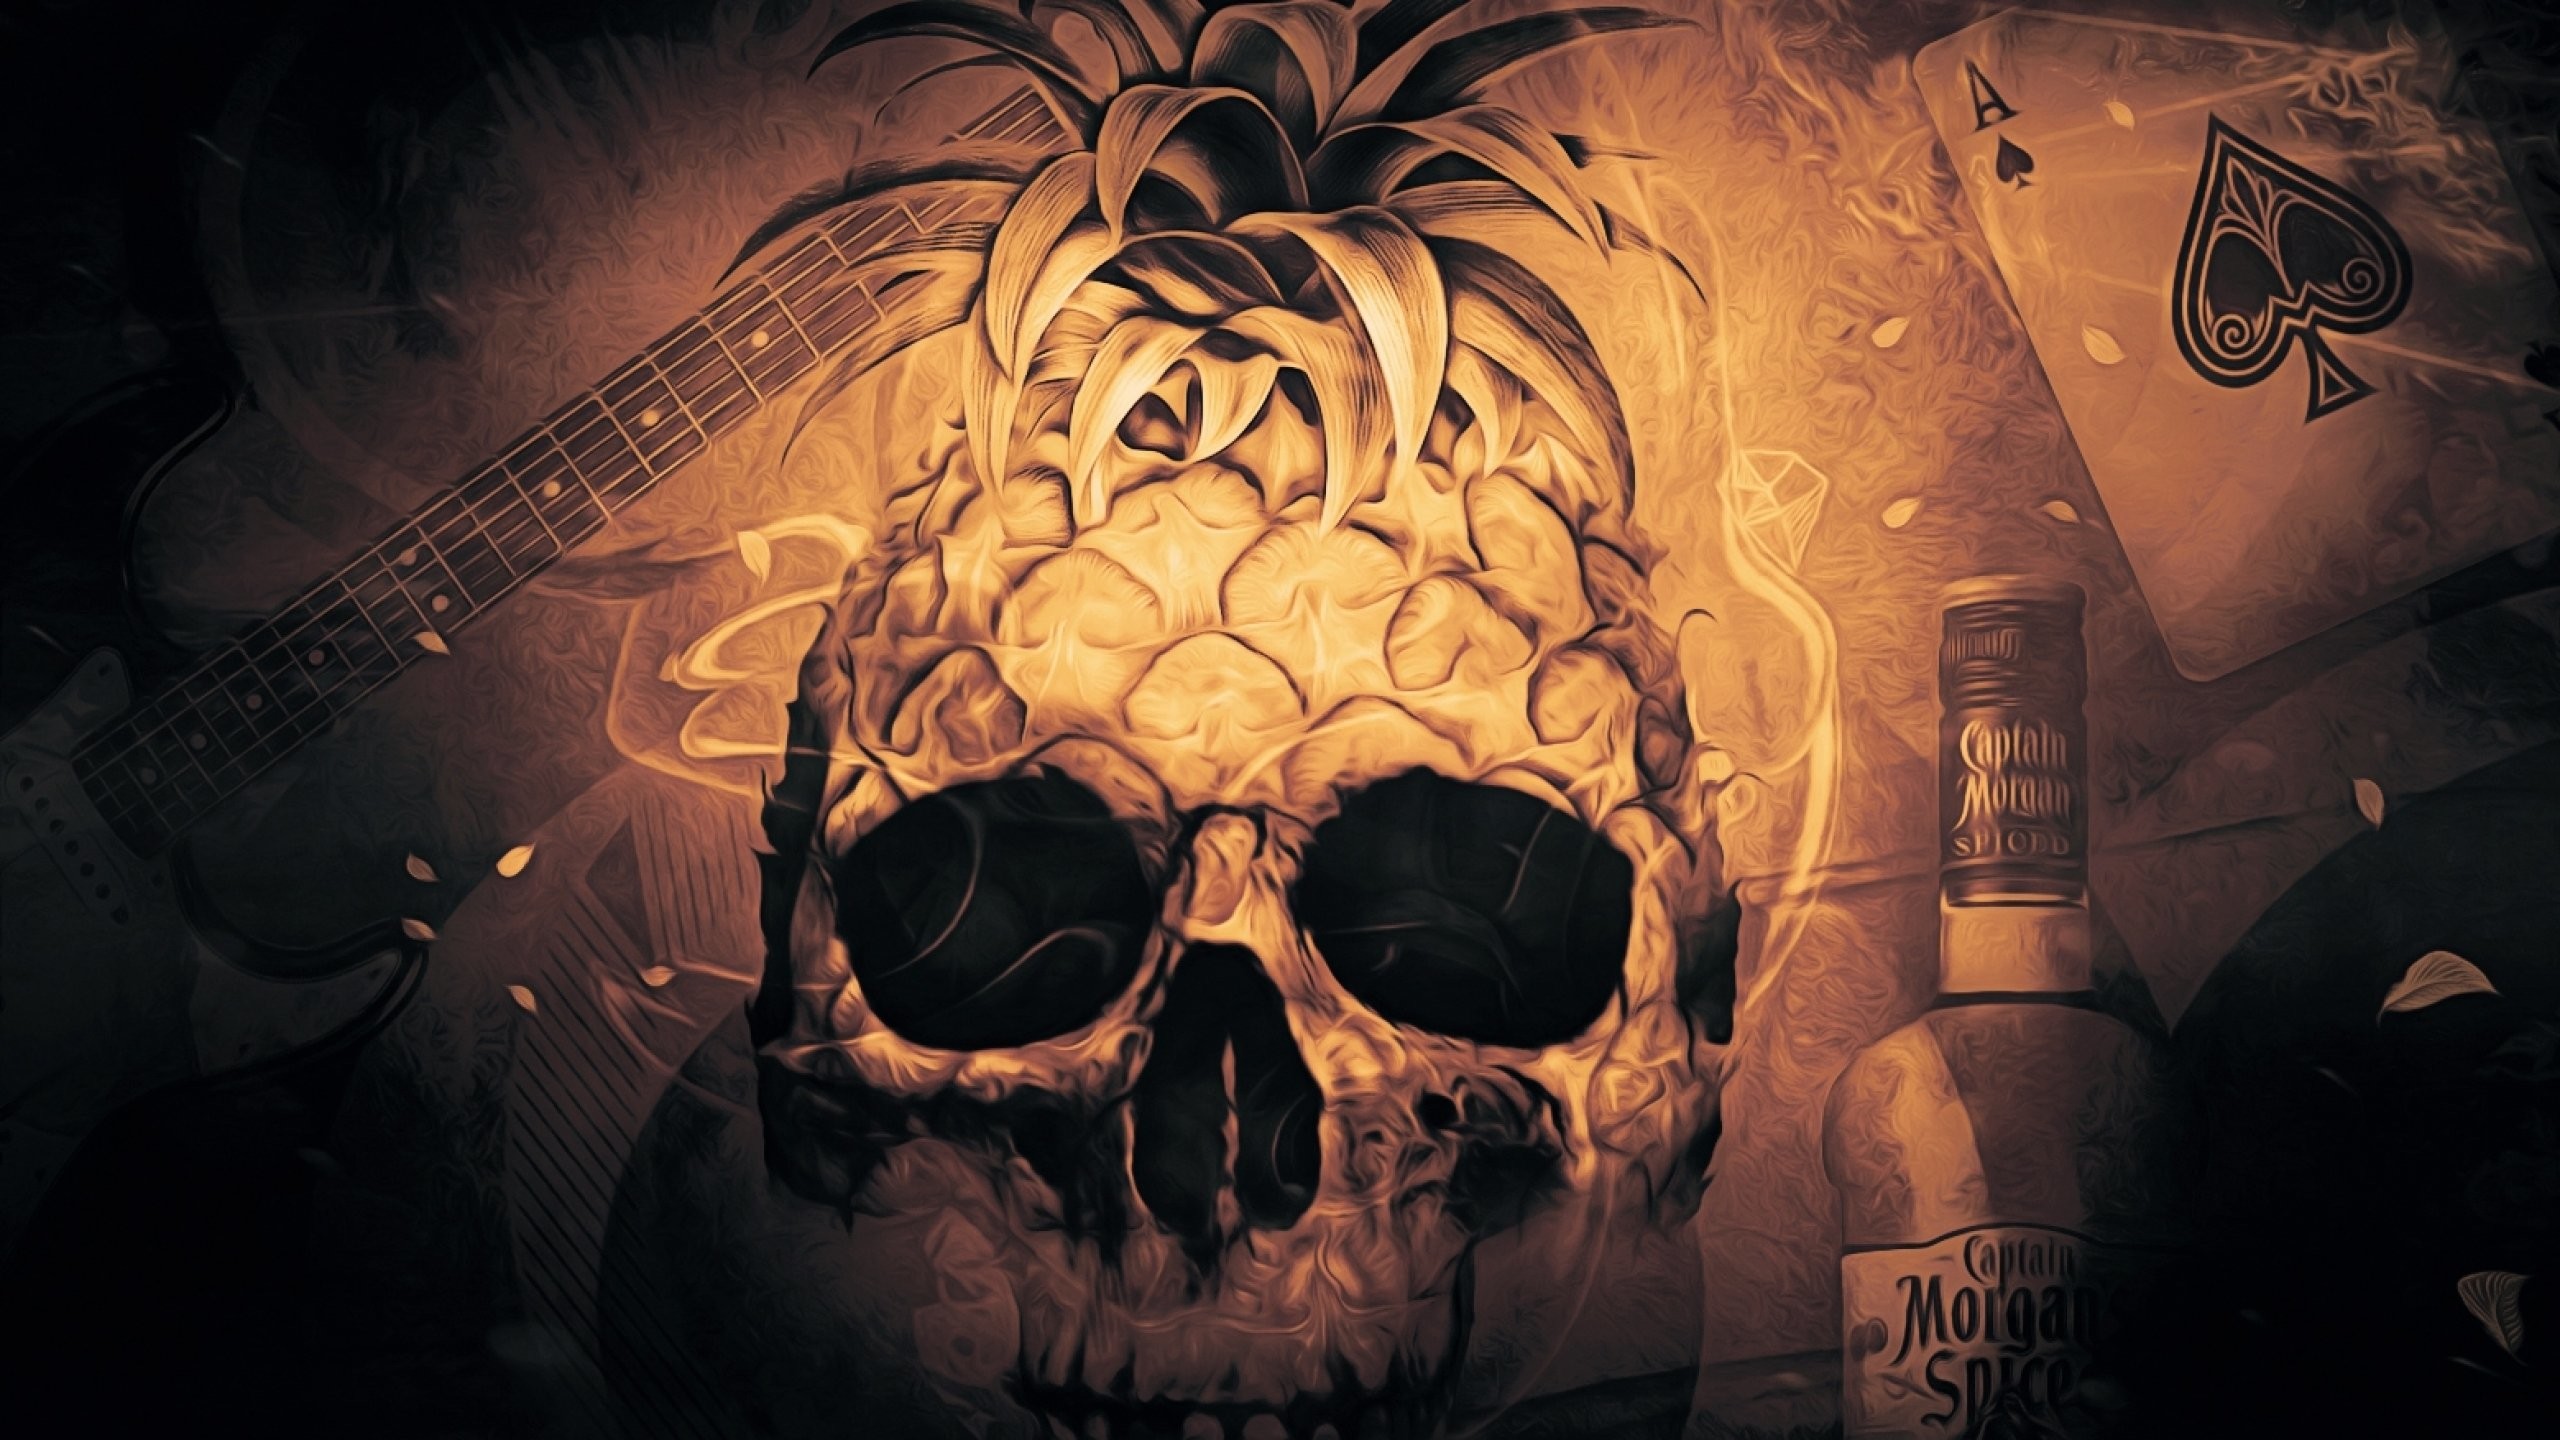 2560x1440 peace free vectors, tablet backgrounds, skull, abstarct stock imagesfree  vector images, artwork, evil,hd abstract wallpapers, art, skulls, skeleton,  ...